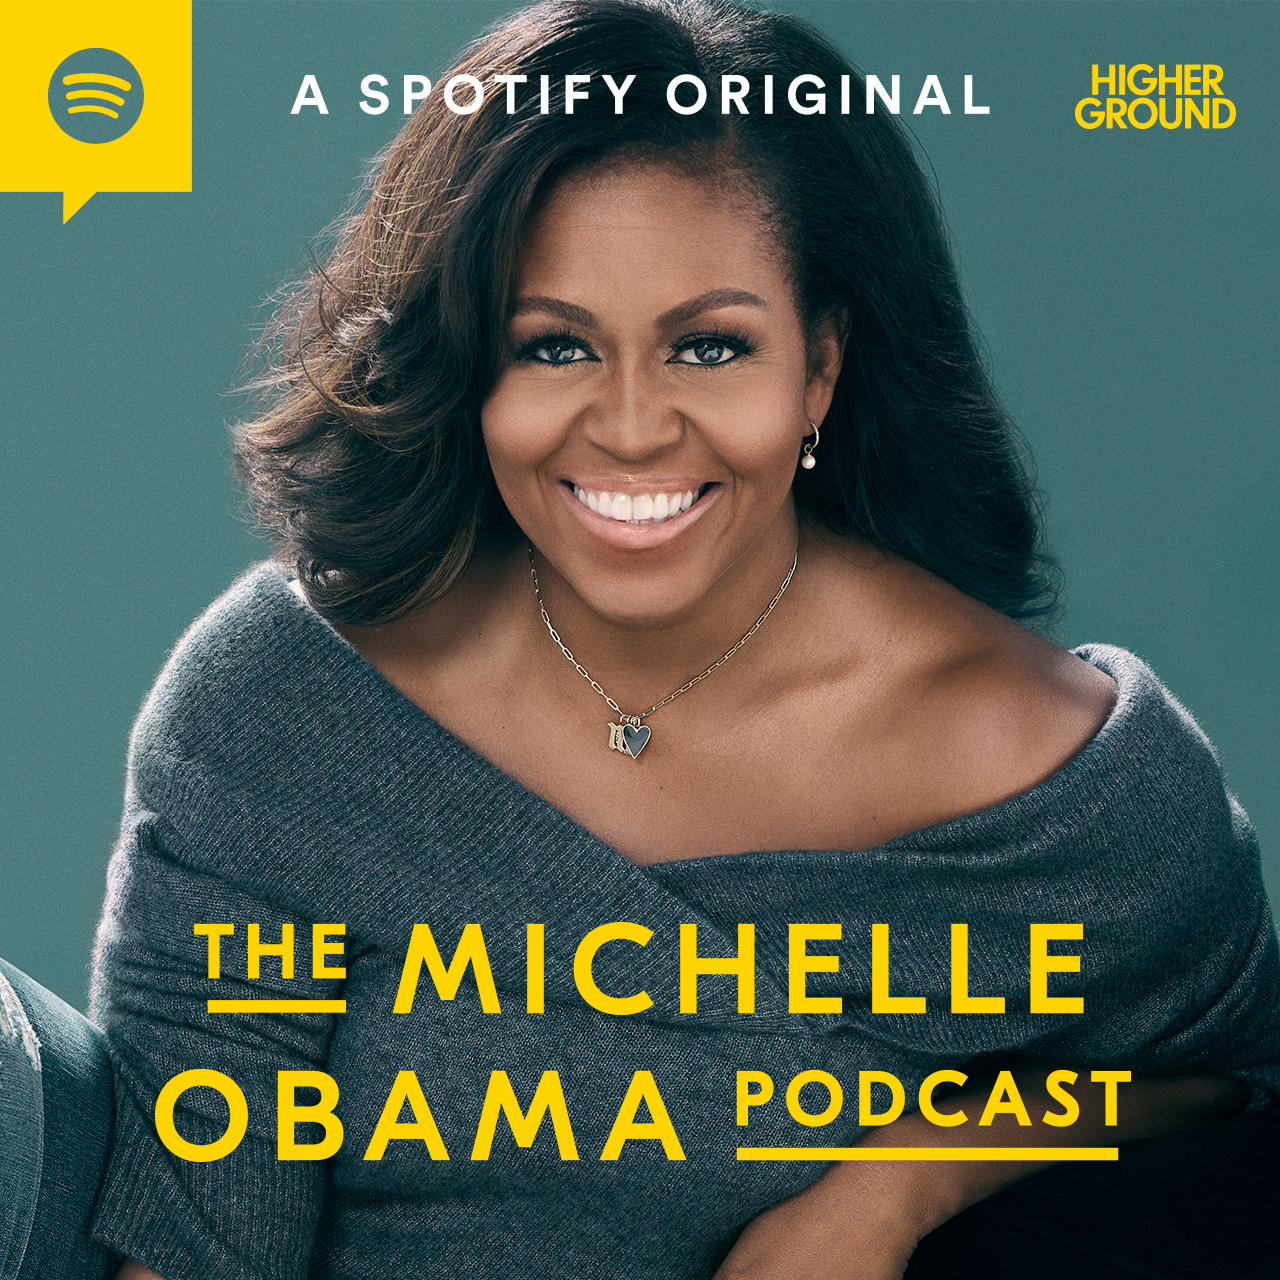 Spotify and Higher Ground Productions Announce ‘The Michelle Obama Podcast’ Set for July 29 Launch